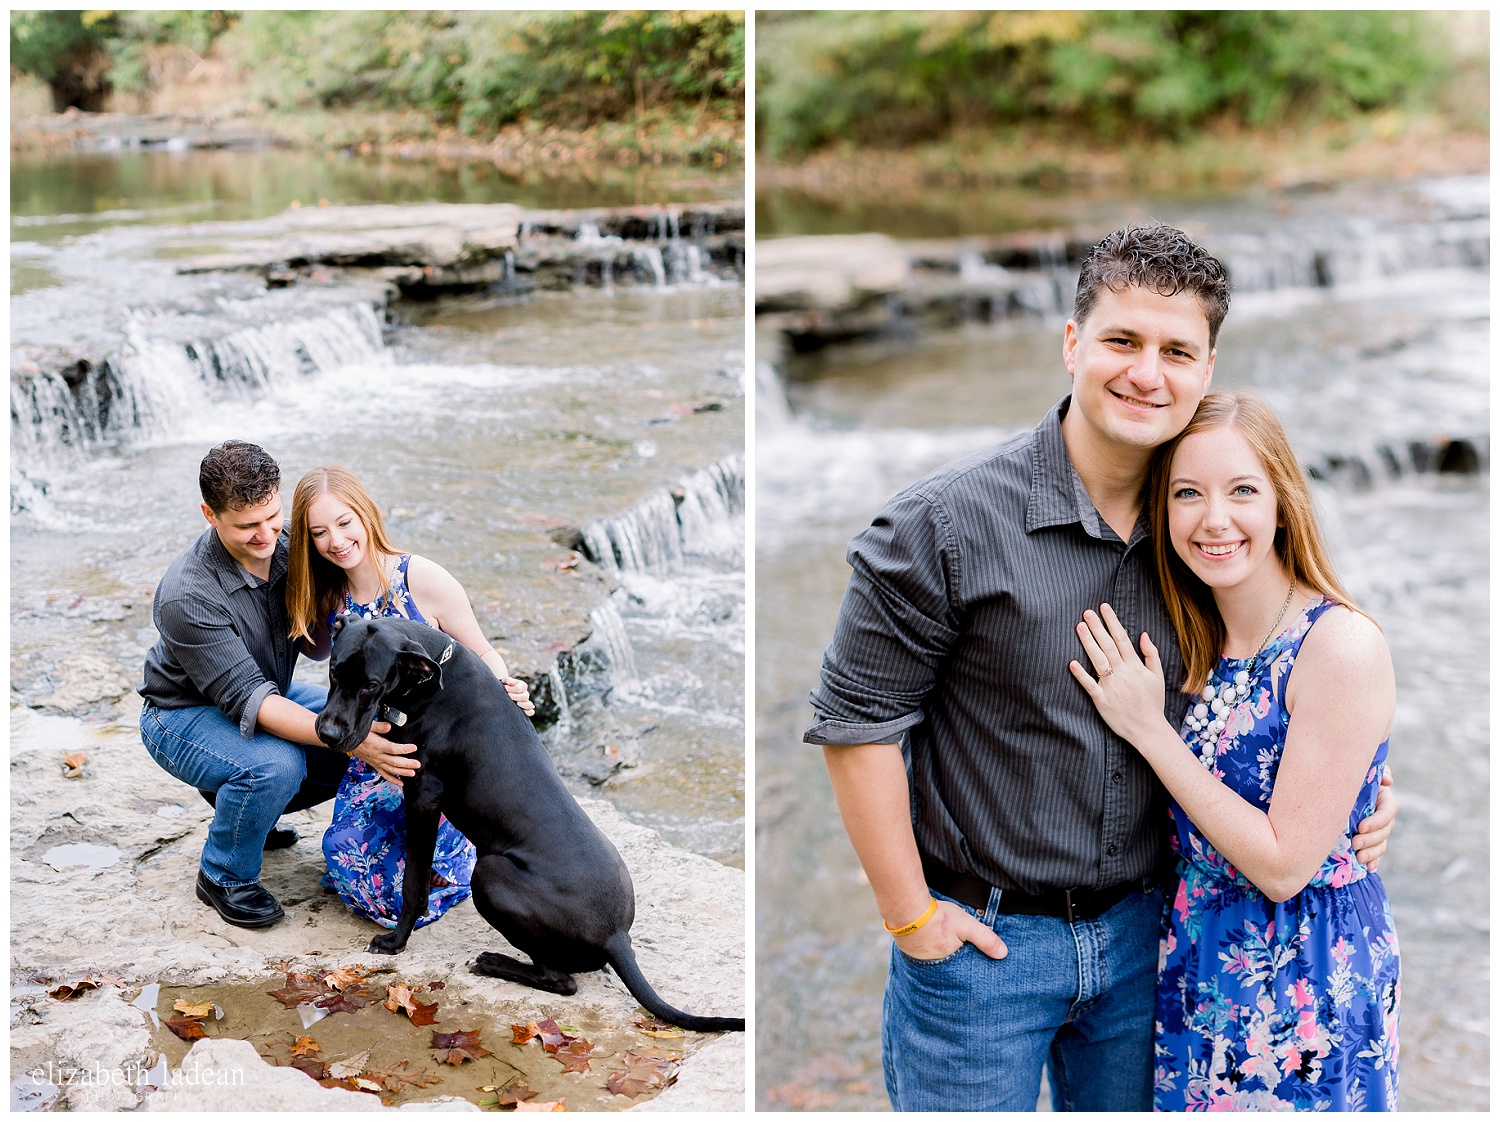 Northland-KC-Fall-Engagement-Photos-with-dog-A+B-2018-elizabeth-ladean-photography-photo_1496.jpg